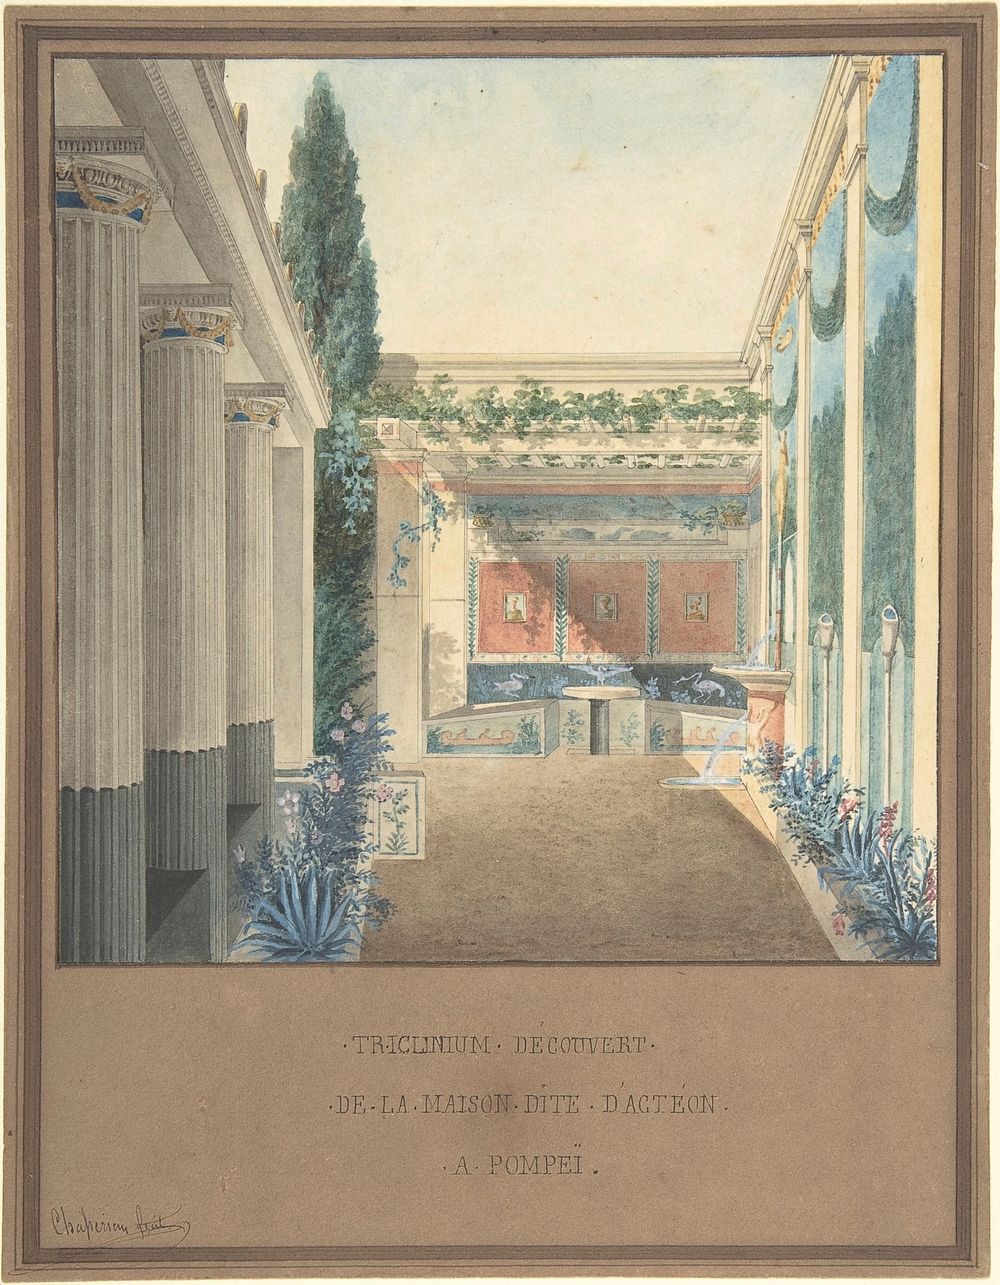 Triclinium, Excavated in the House of Actaeon, Pompeii by Charles Fr&eacute;d&eacute;ric Chass&eacute;riau